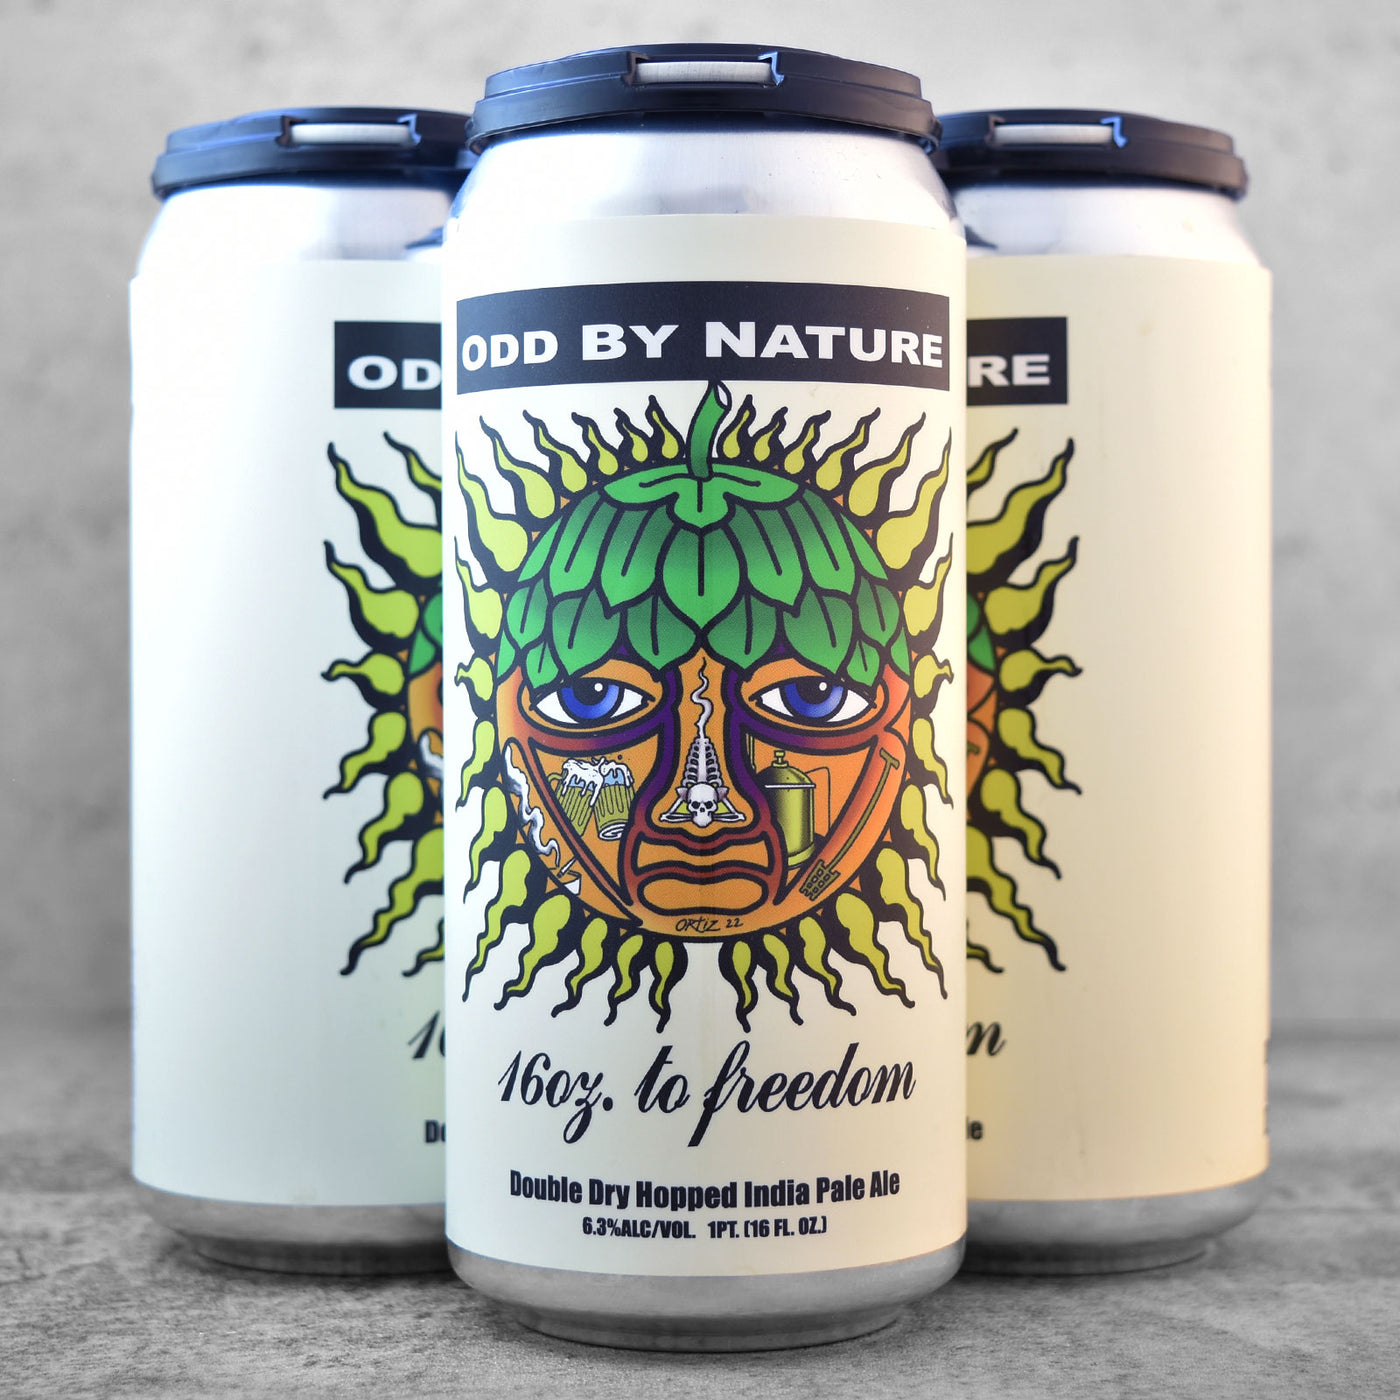 Odd By Nature 16oz. To Freedom